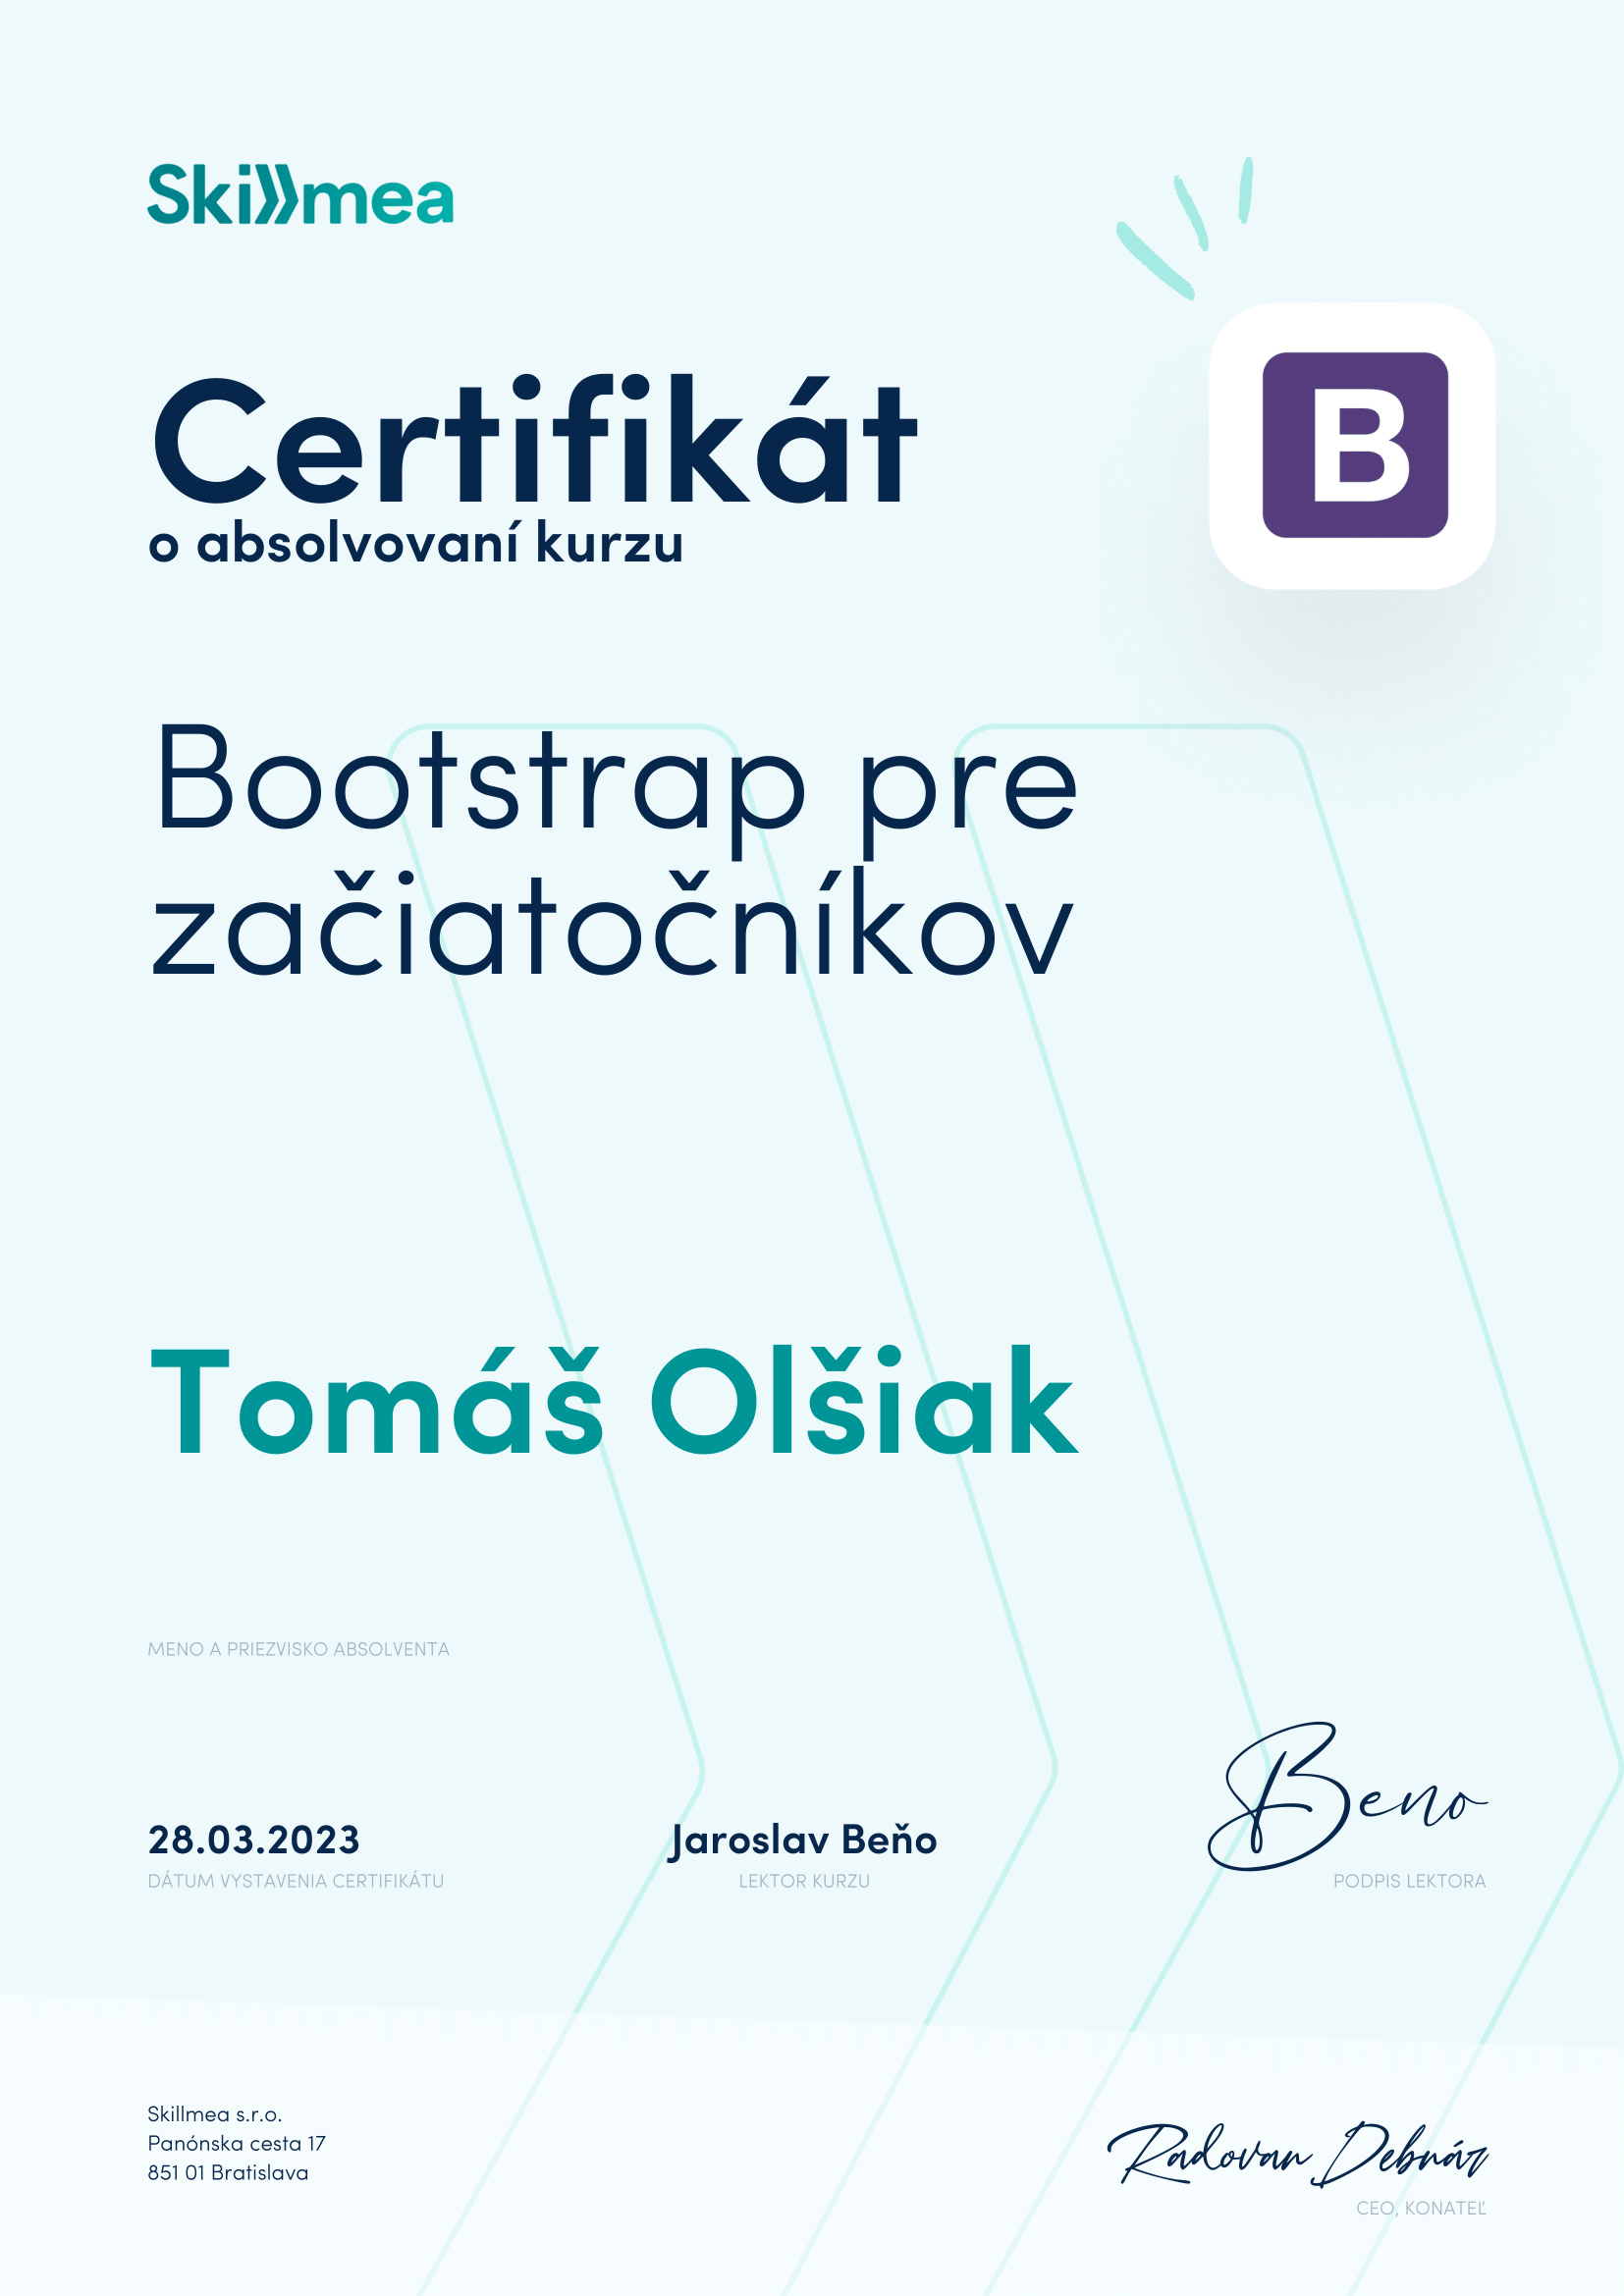 a photo of my certificate for Bootstrap